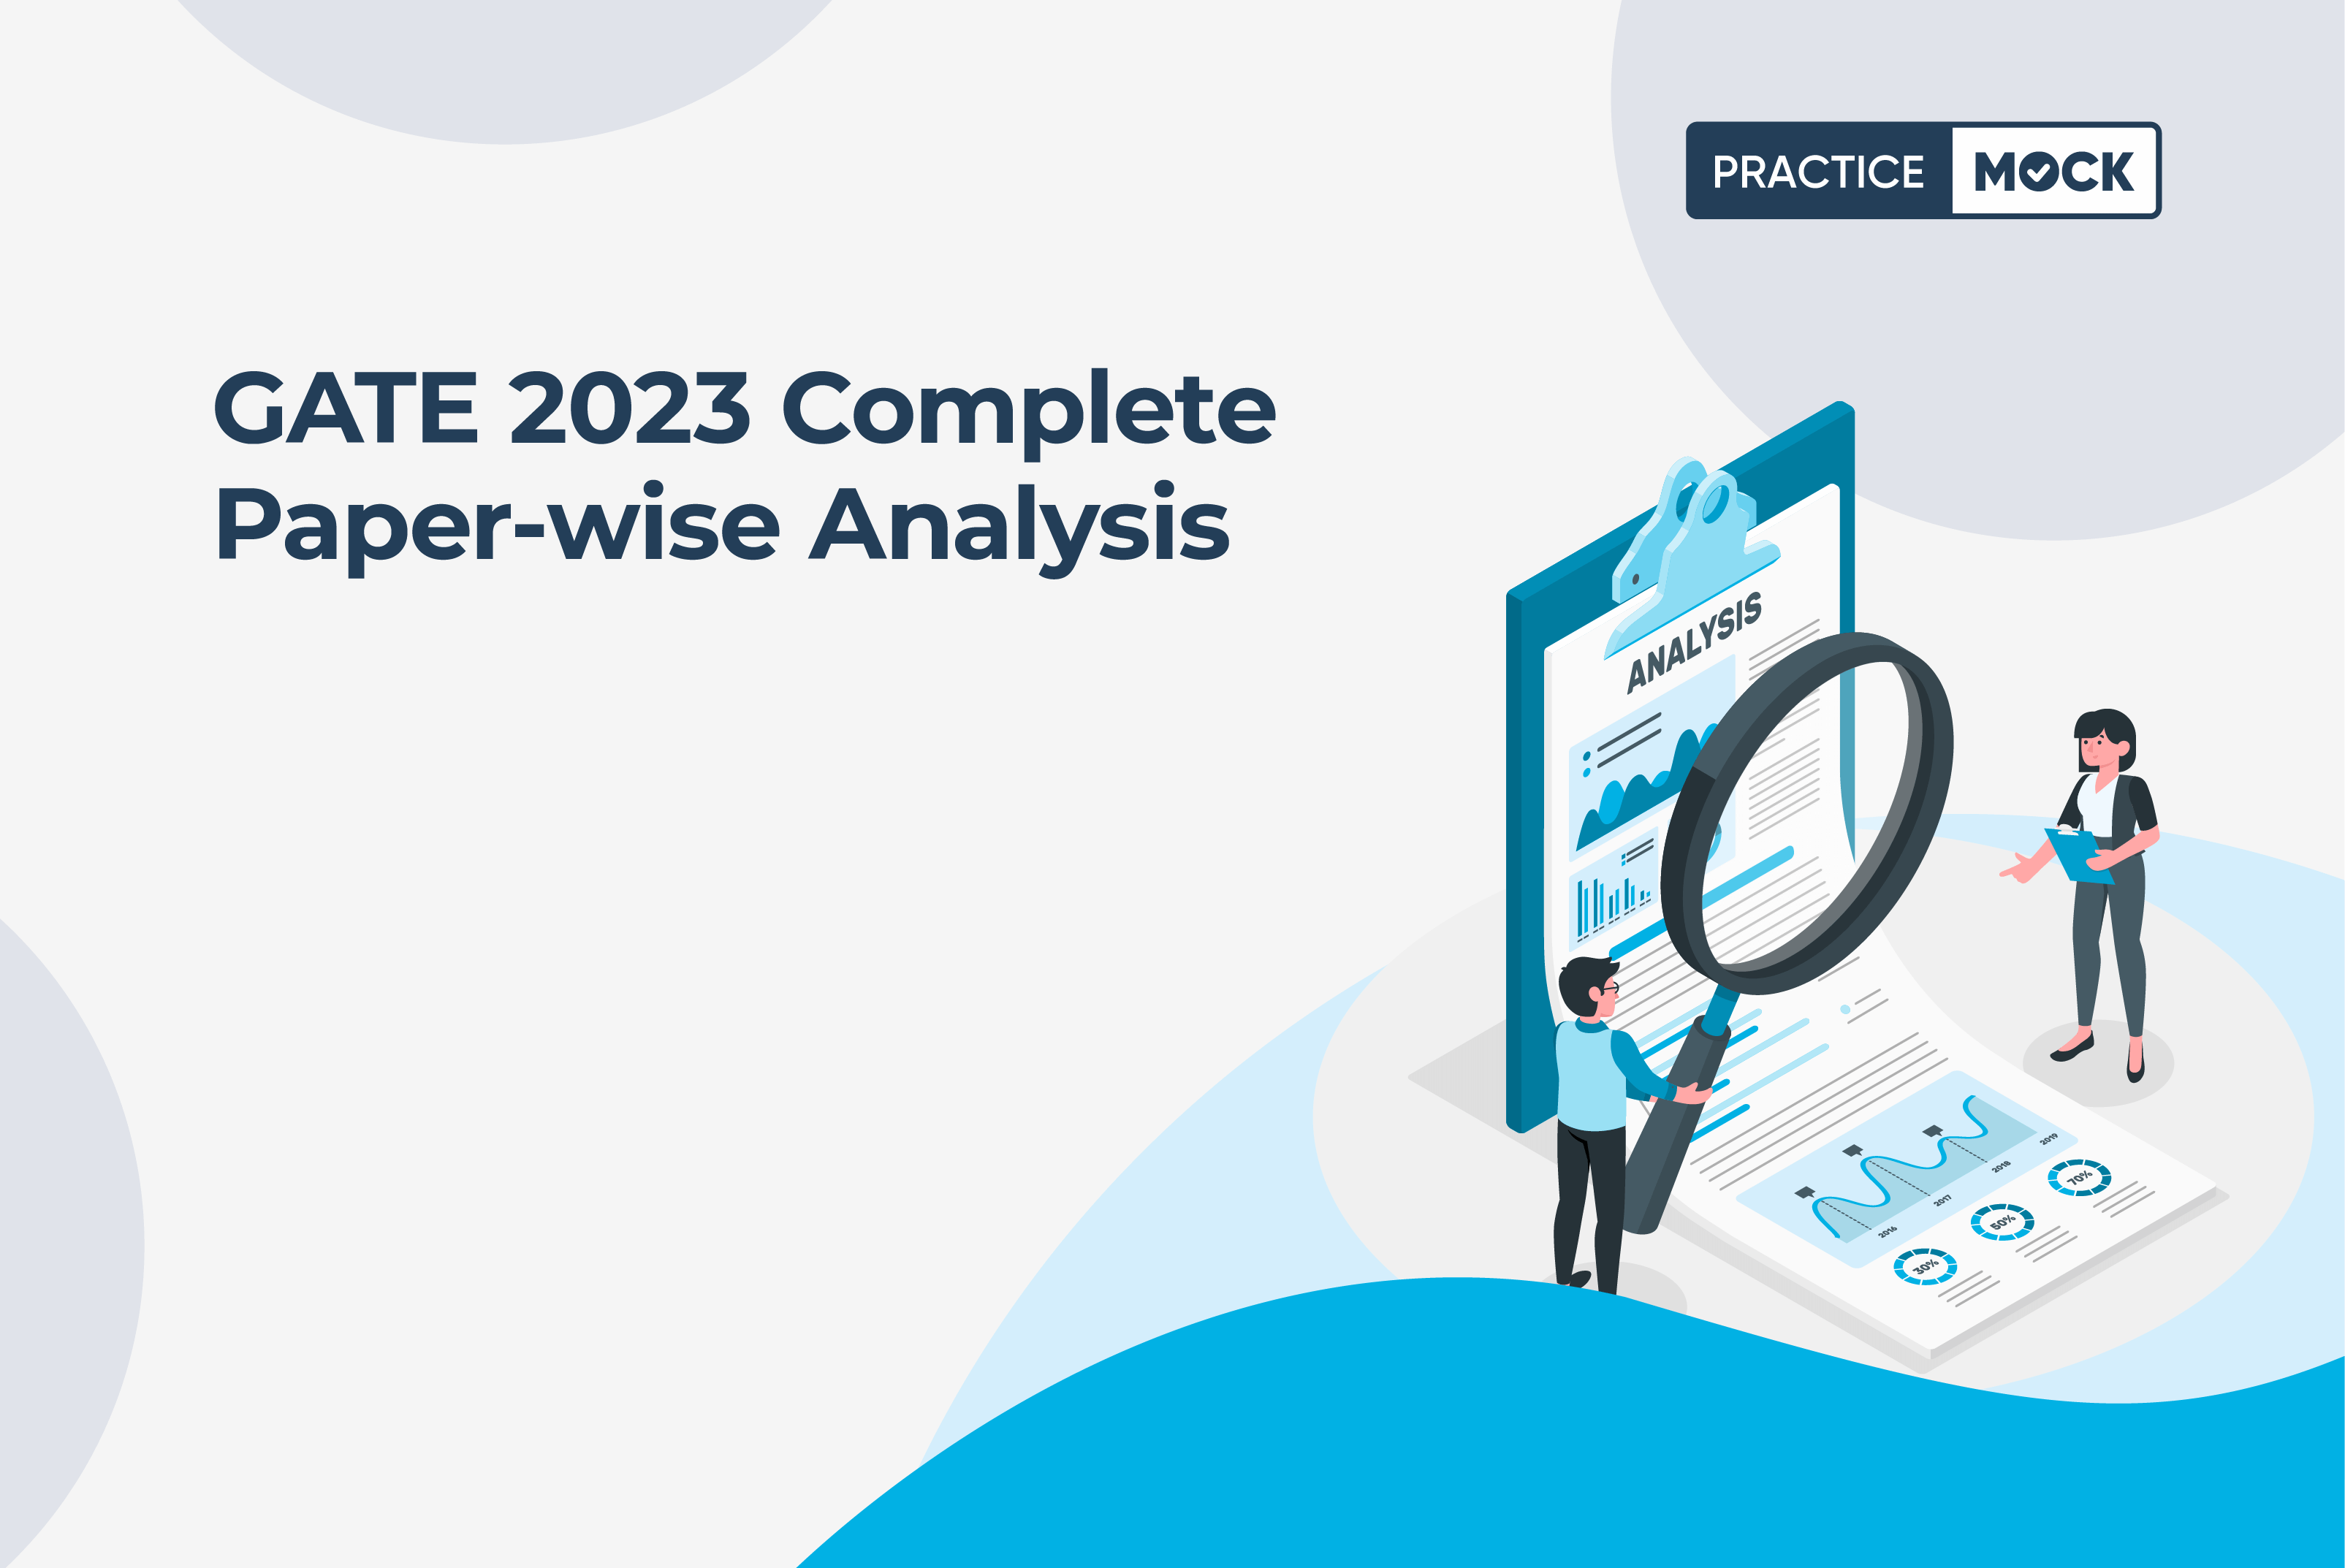 GATE 2023 Complete Paper-wise Analysis